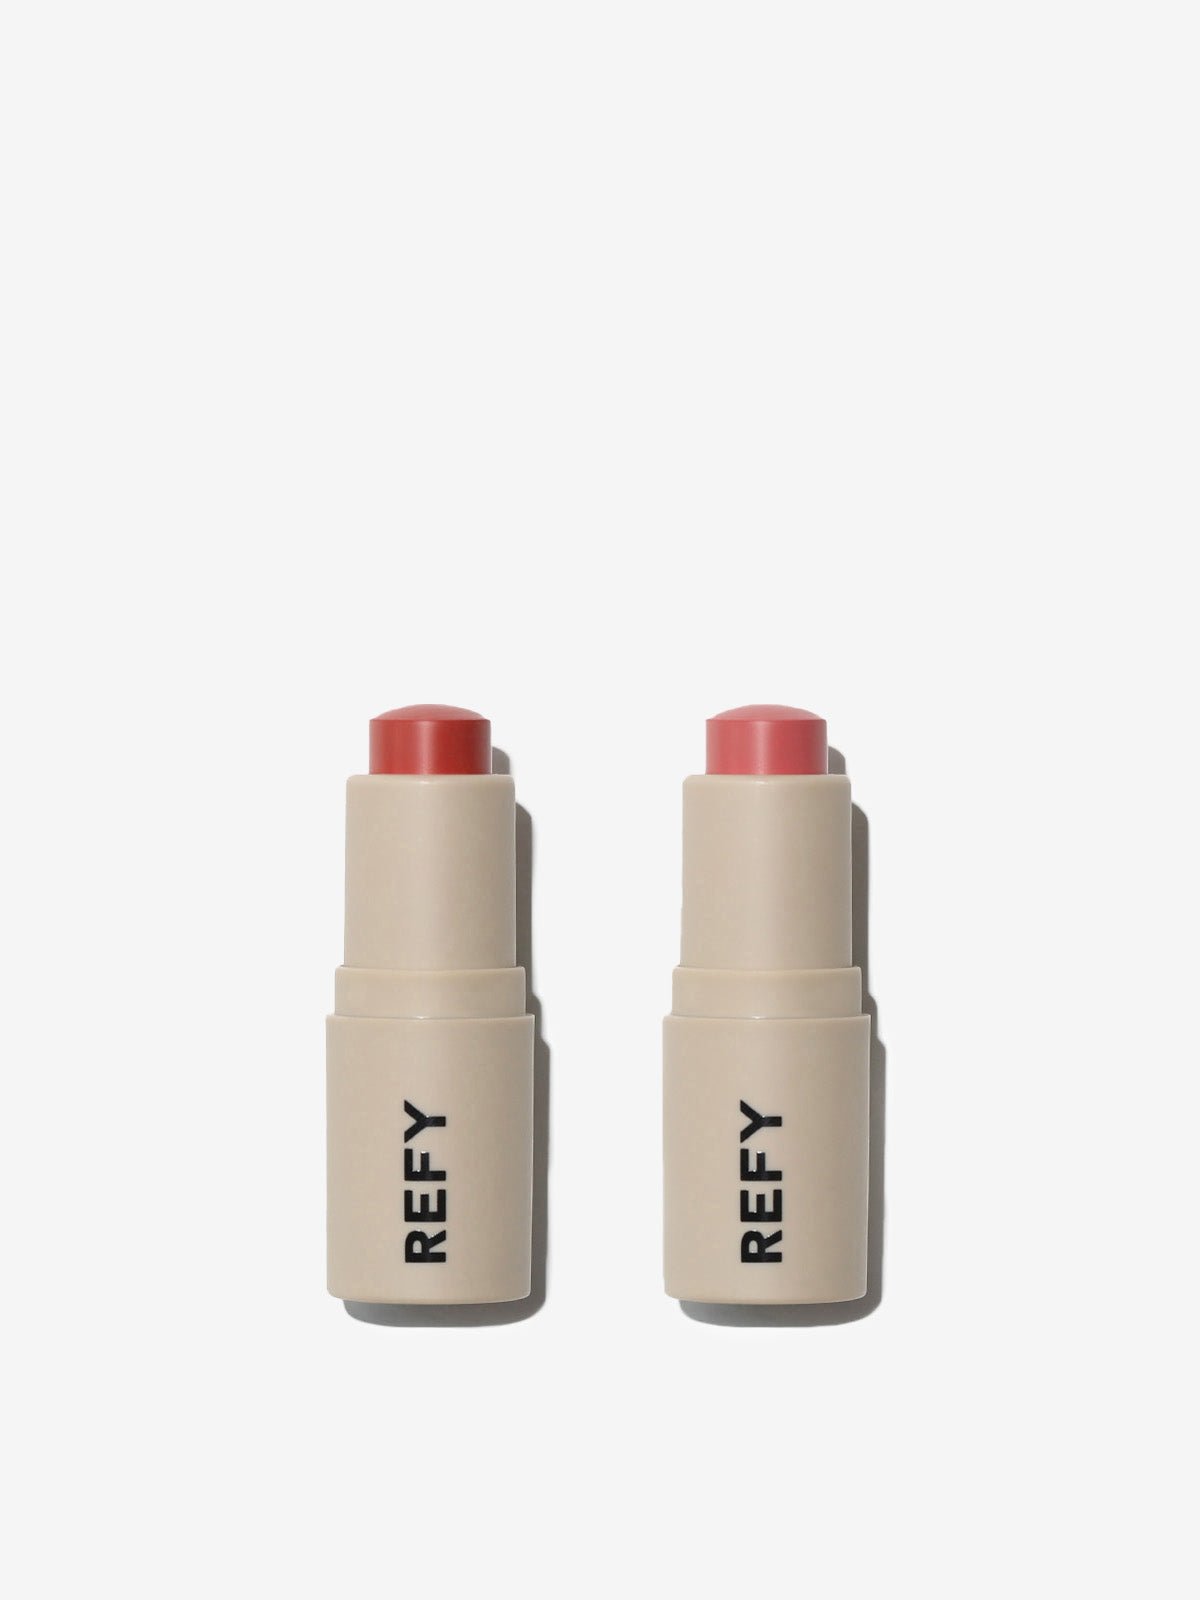 REFY LIP BLUSH DUO IN SHADES AMBER & BLOOM